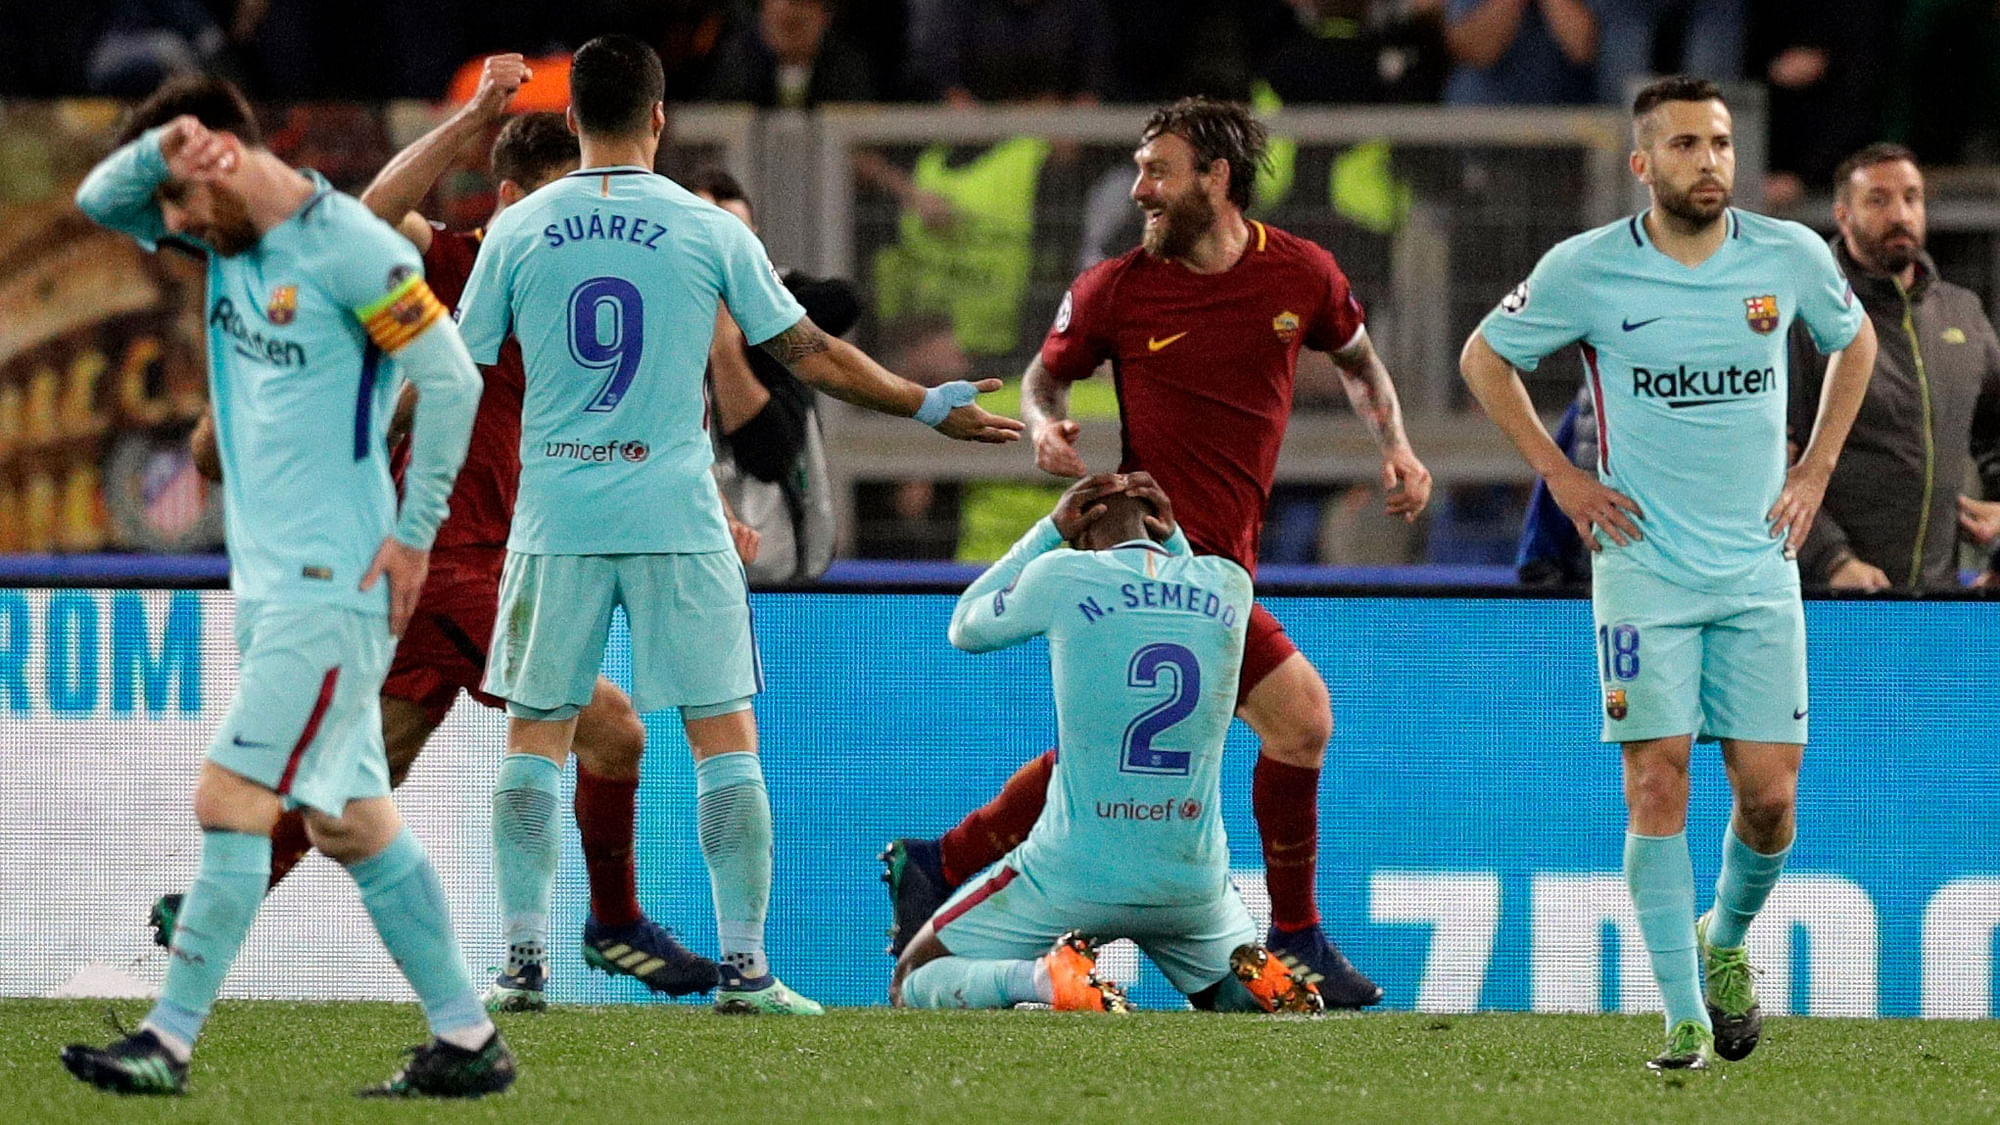 Roma pulled off an extraordinary comeback to knock Barcelona out of the Champions League.